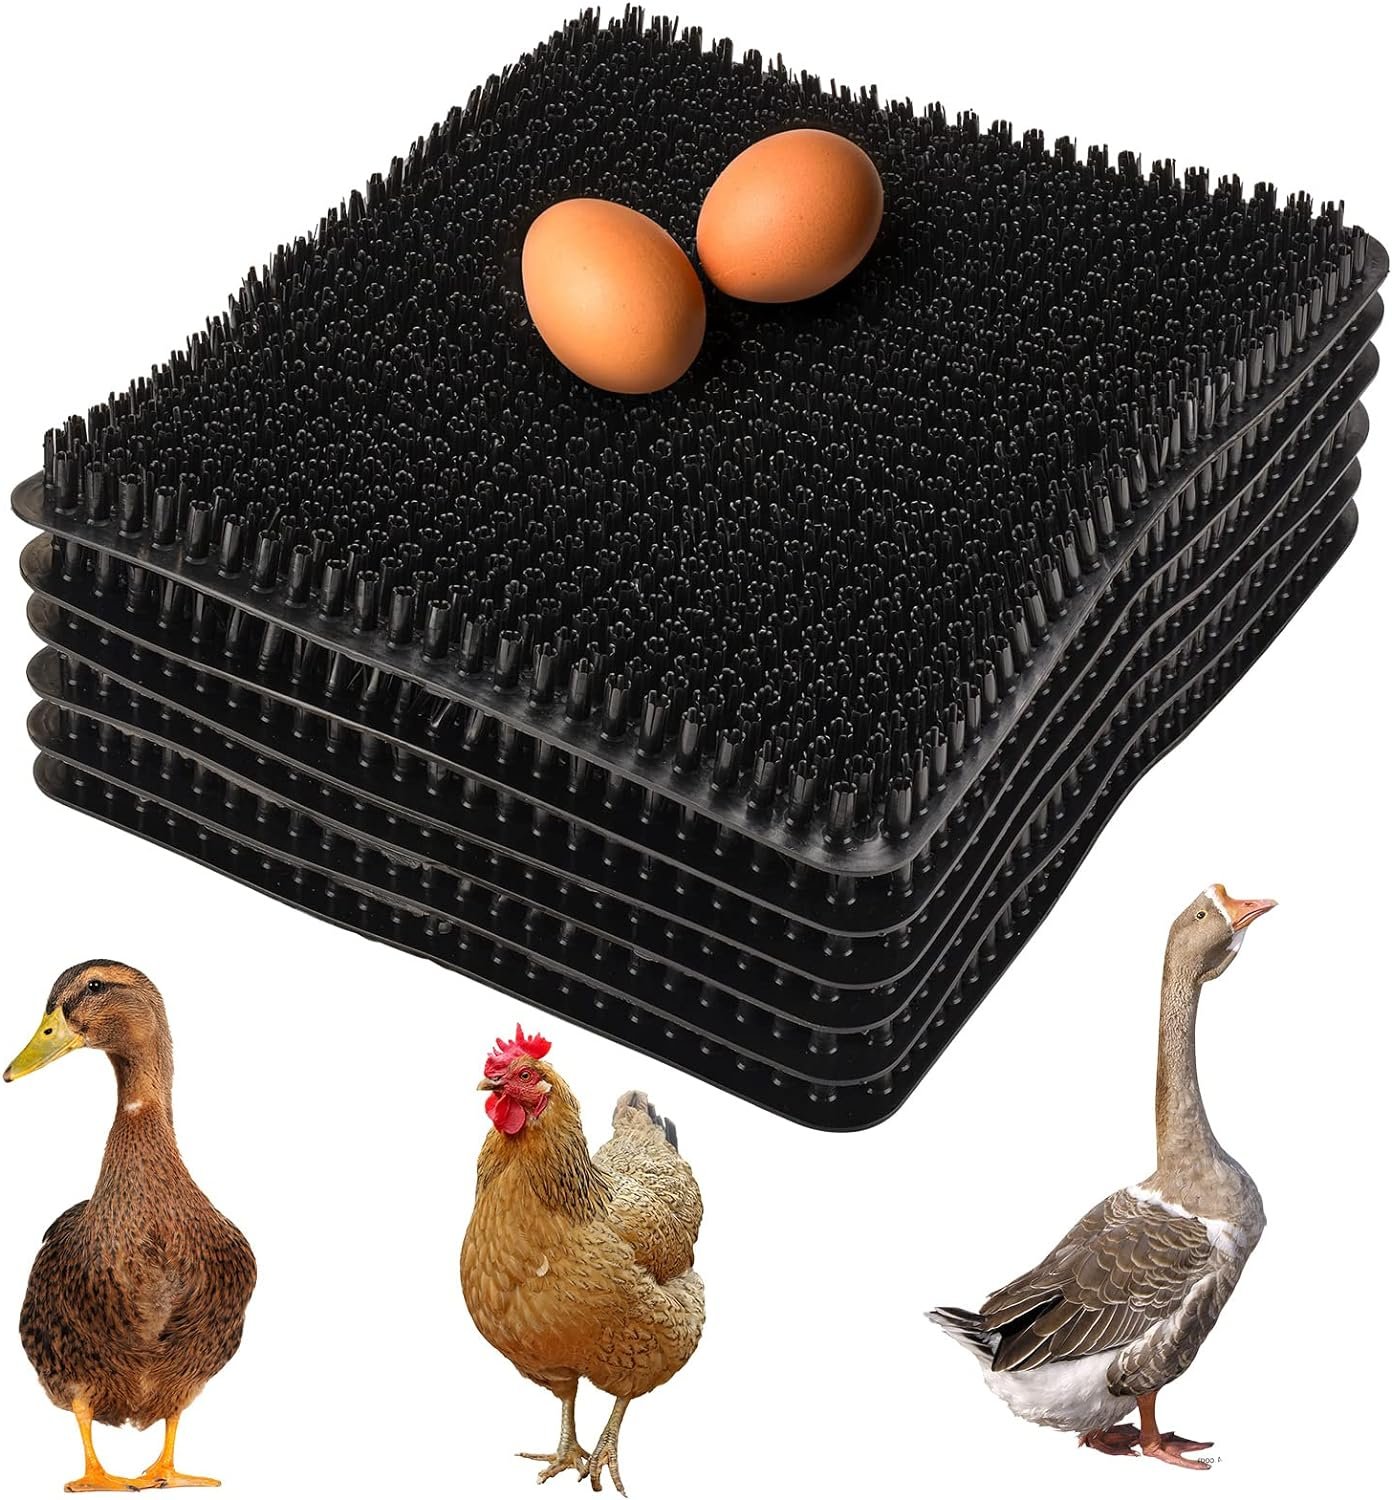 QMCAHCE 6Pcs Chicken Coop Grass Pads, Washable Plastic Nesting Liners, Reusable Egg Laying Mats for Chicken Coop Poultry Nest Boxes, Chicken Coop Plastic Bedding Mats (Black)